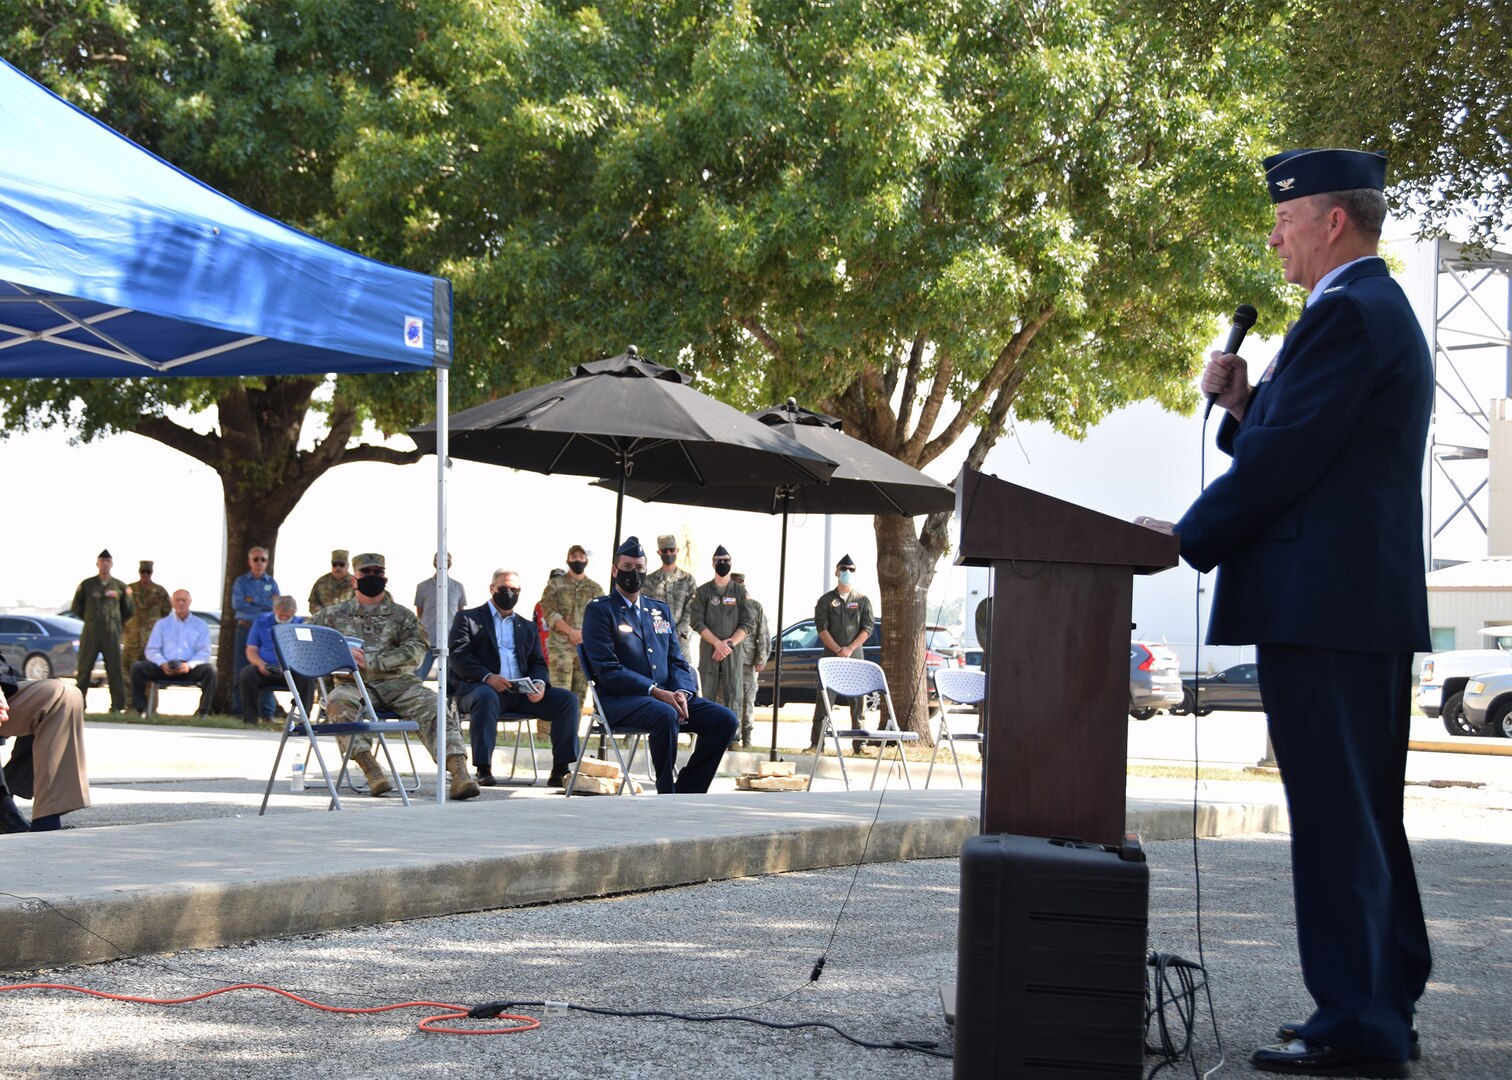 Col. Terry W. McClain, 433rd Airlift Wing commander, makes opening remarks during a remembrance and wreath laying ceremony for mission BRAVO-12 Aug. 28, 2020 at Joint Base San Antonio-Lackland, Texas.